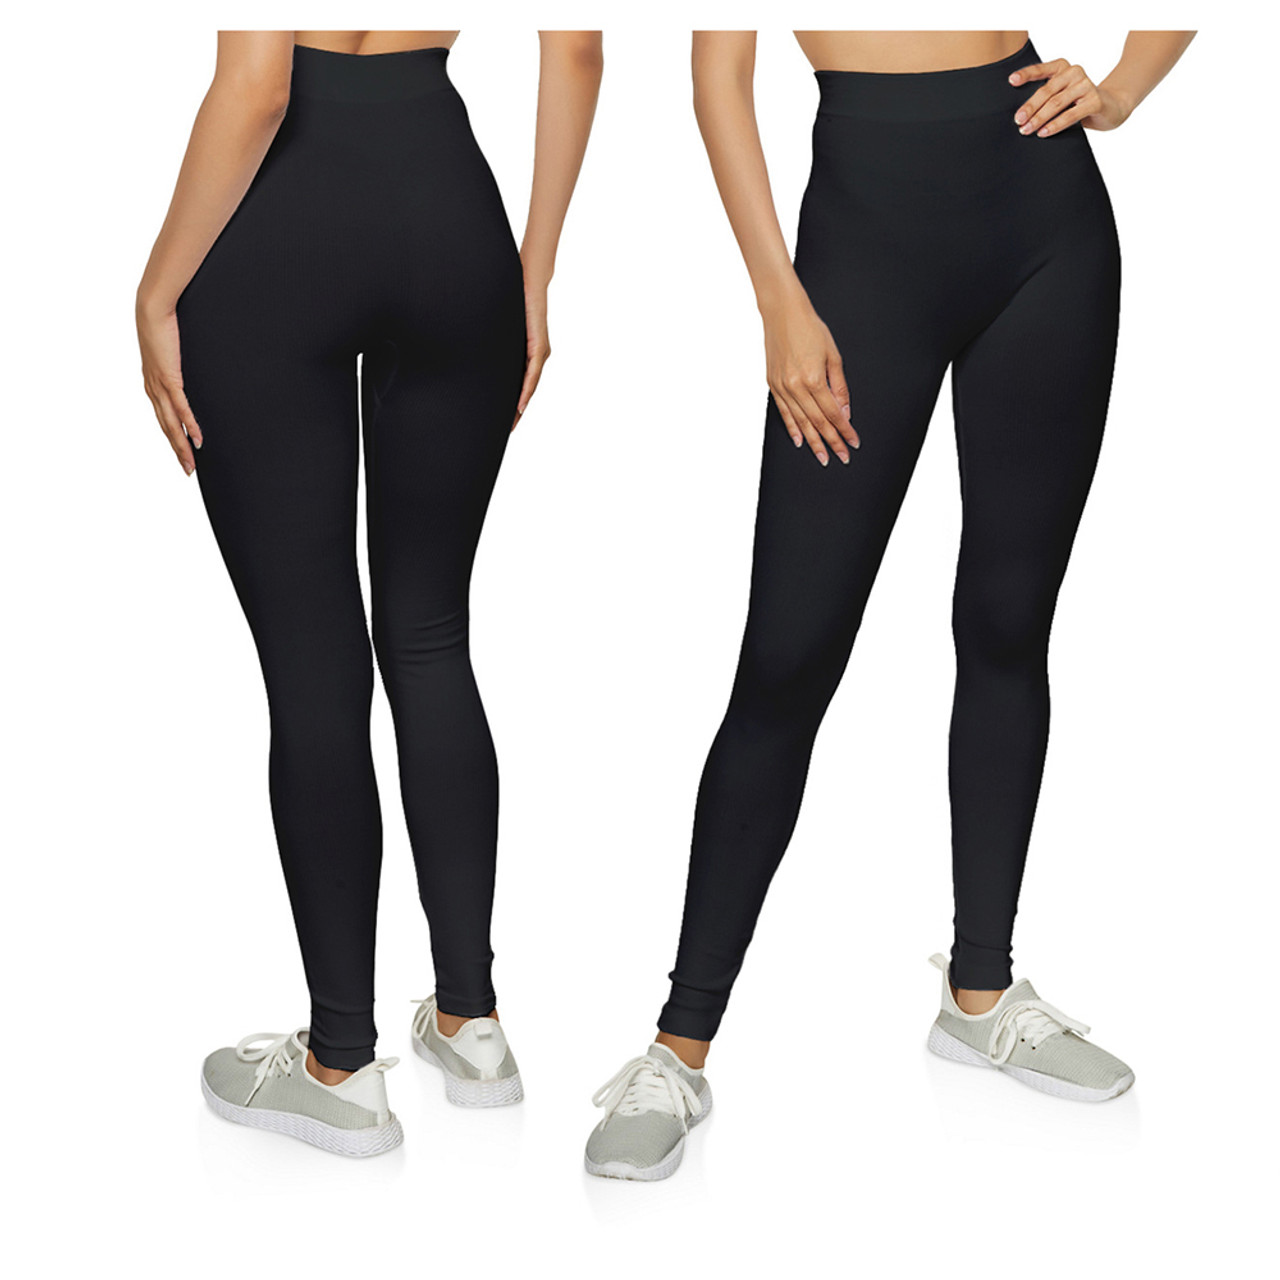 Women's High Waisted Tummy Control Seamless Leggings (2-Pack) product image